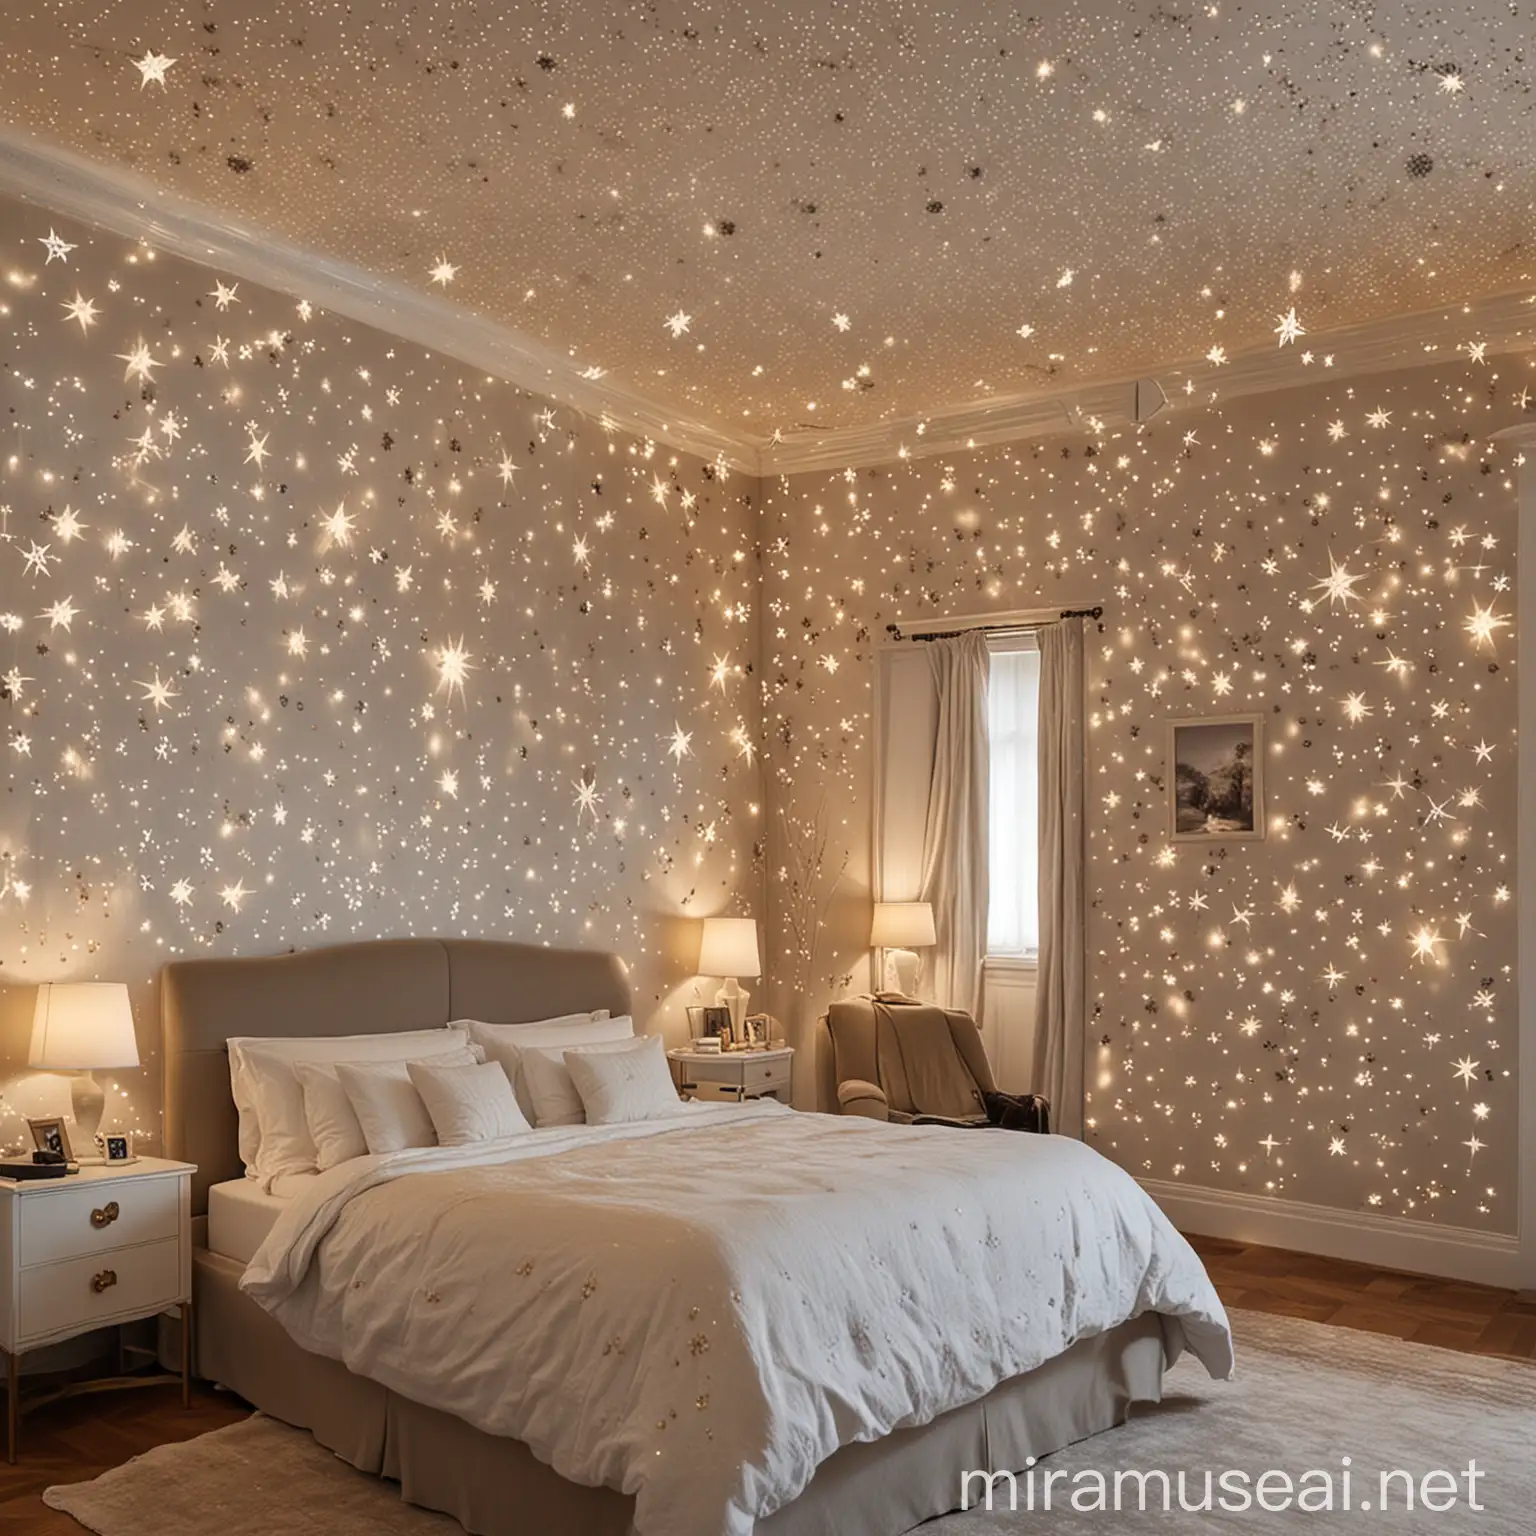 Bedroom with Shimmering Star Walls